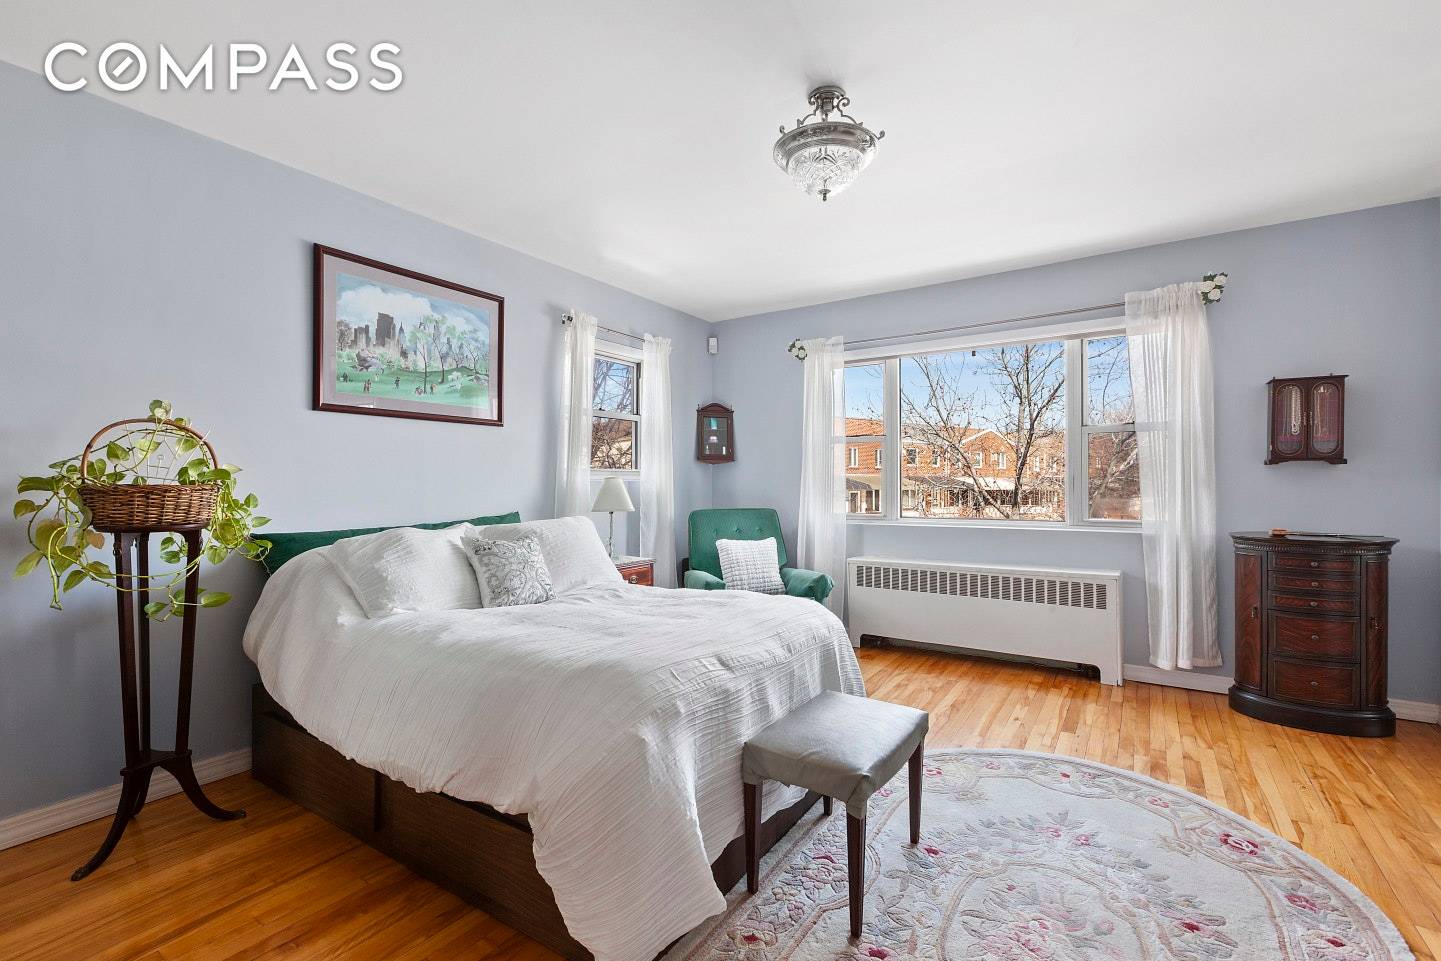 open house is by appt. Enter this meticulously renovated 1 bedroom, Located in one of the most revered cooperatives in Dyker Heights, the quality and taste of every detail is ...